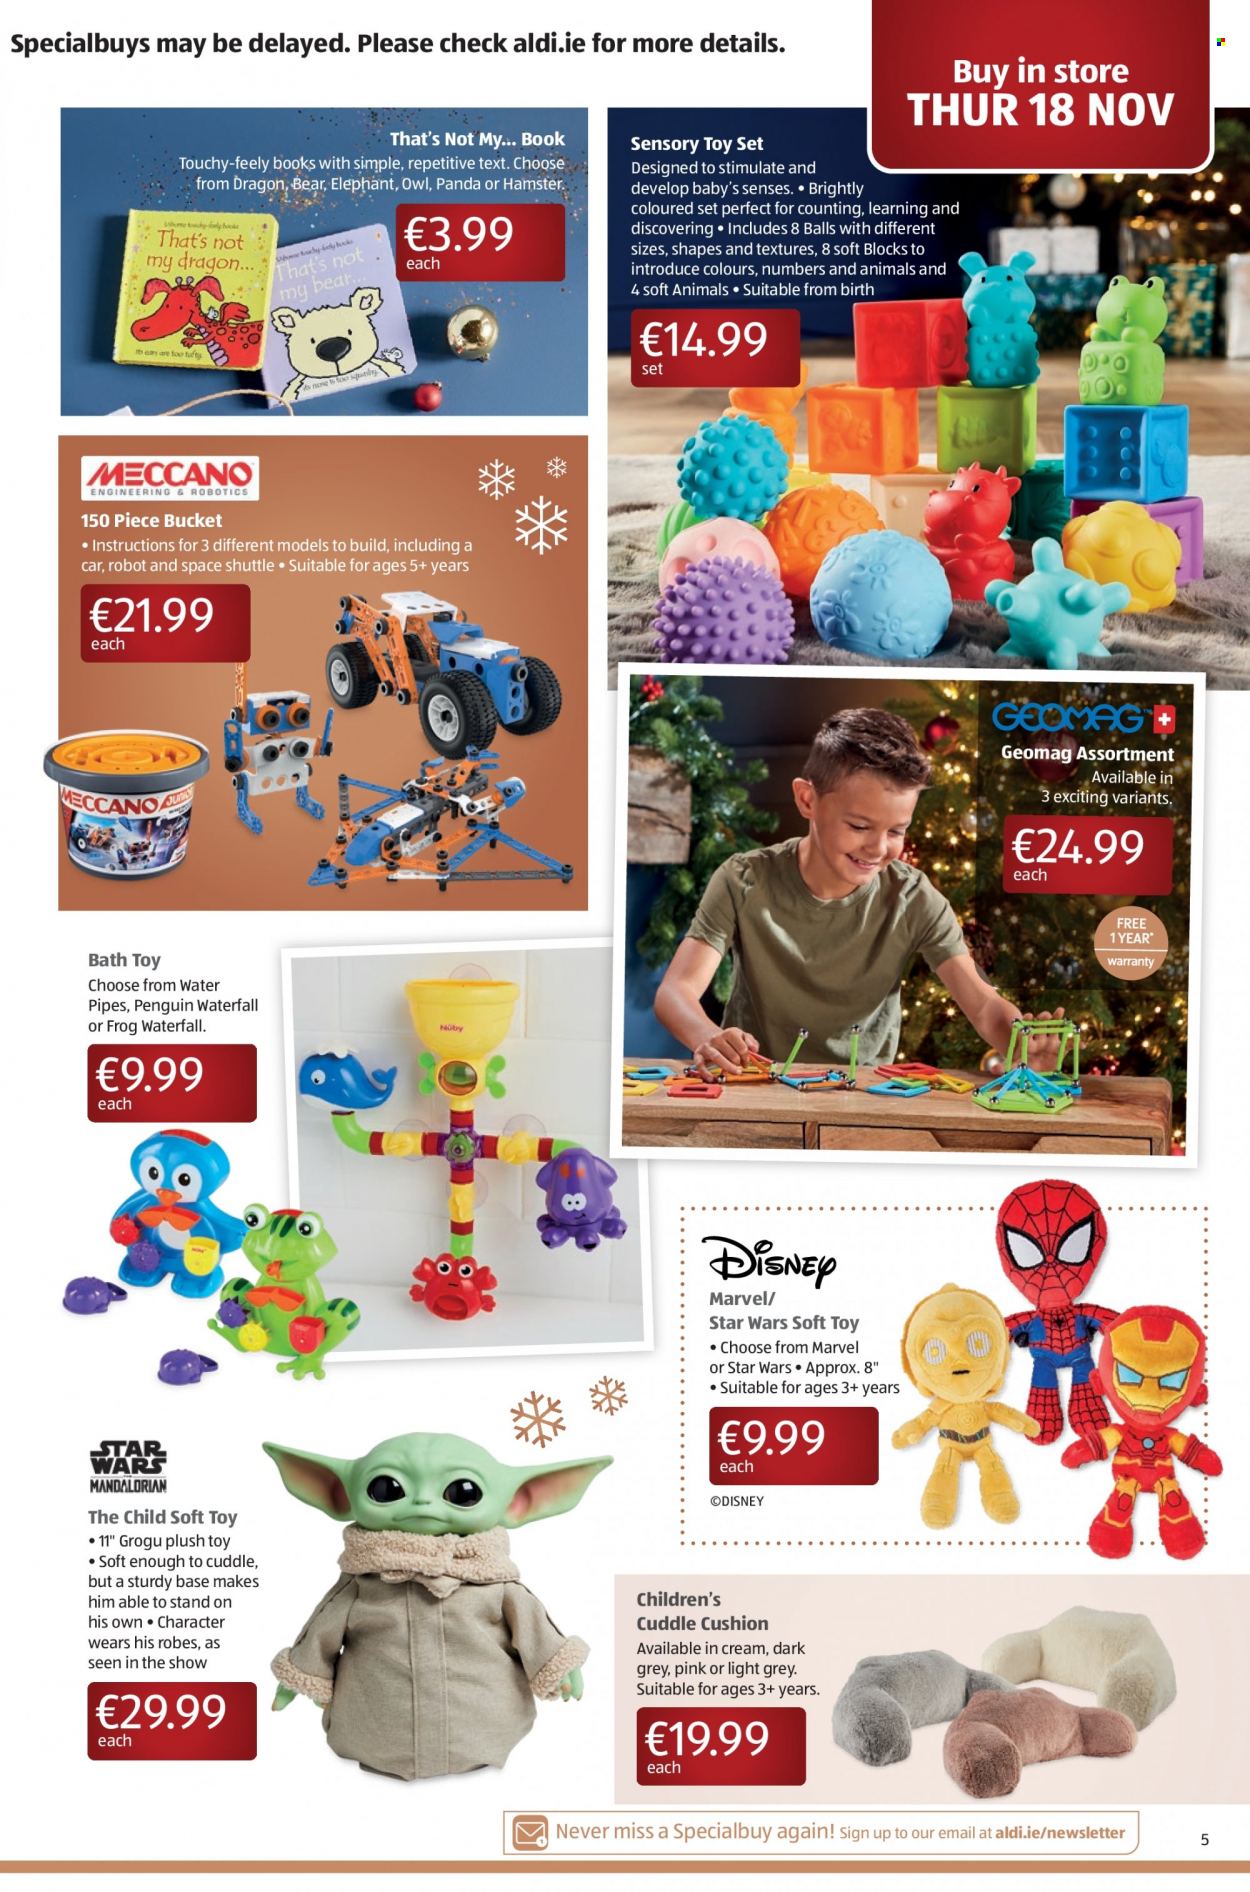 thumbnail - Aldi offer  - 18.11.2021 - 24.11.2021 - Sales products - Disney, book, cushion, robe, robot, penguin, owl, toys, panda. Page 5.